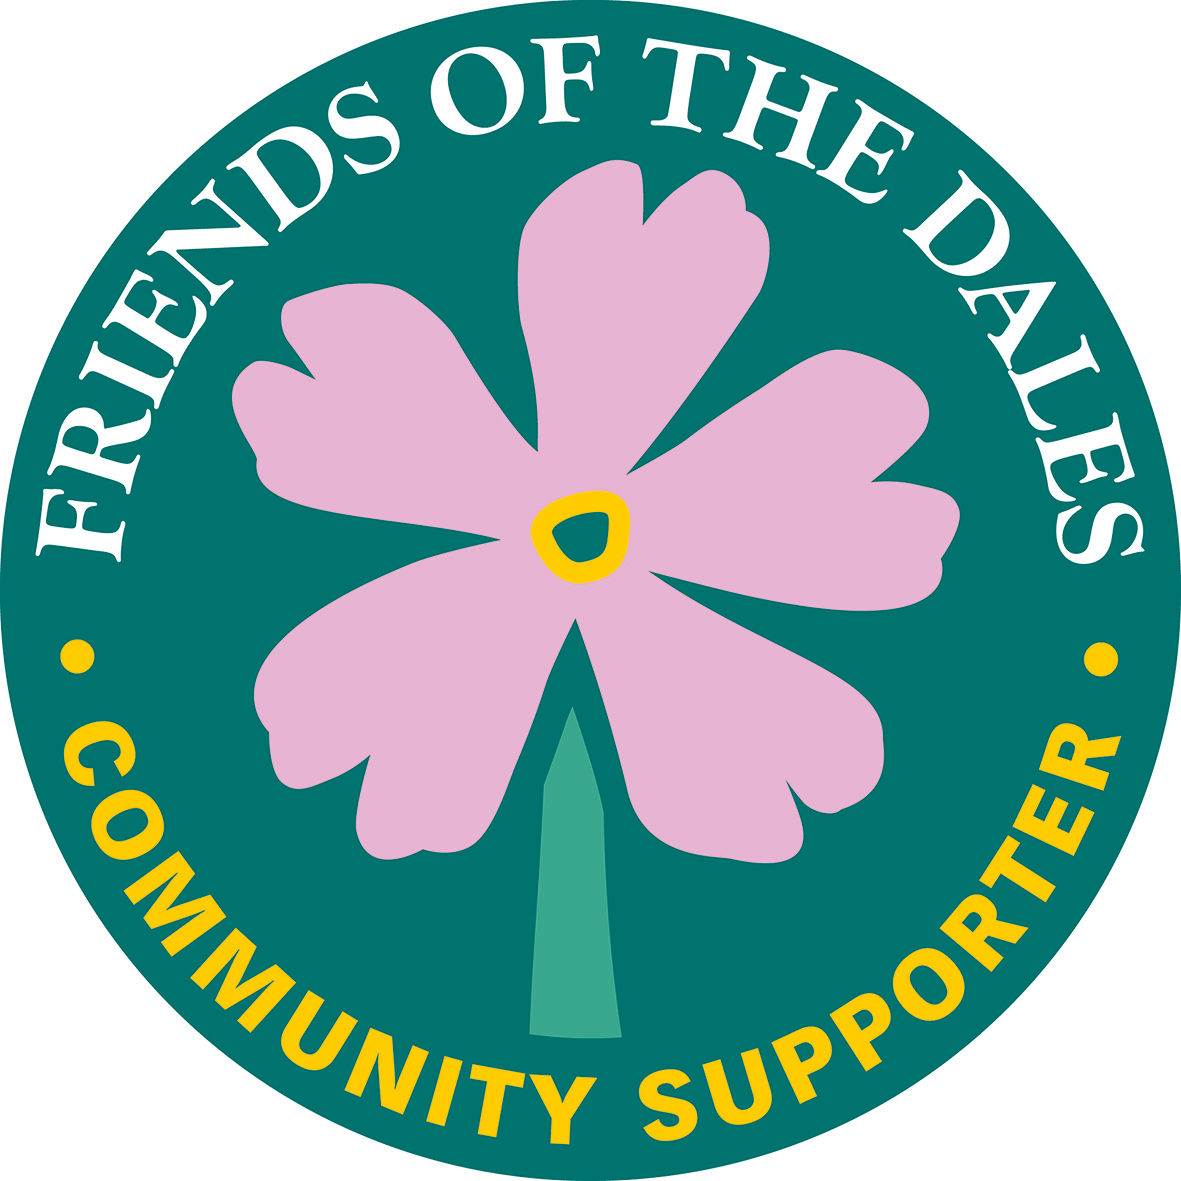 Friends of the Dales Community Supporter